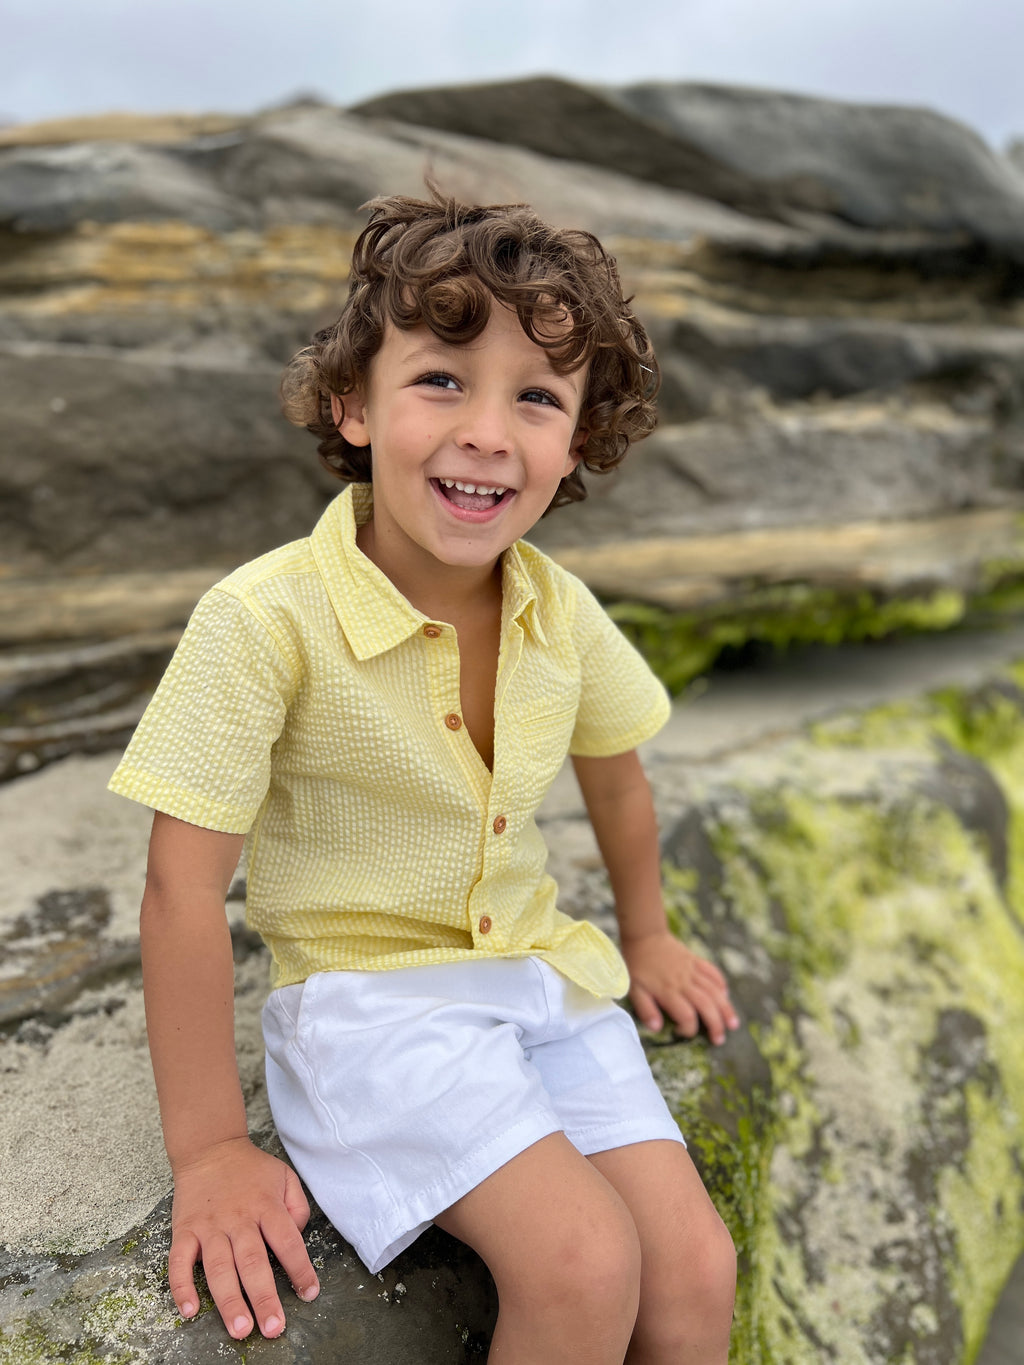 boy with brown curly hair and brown eyes, wearing our Seersucker Woven Shirt, and white gauze shorts sitting on a big rock at the beach